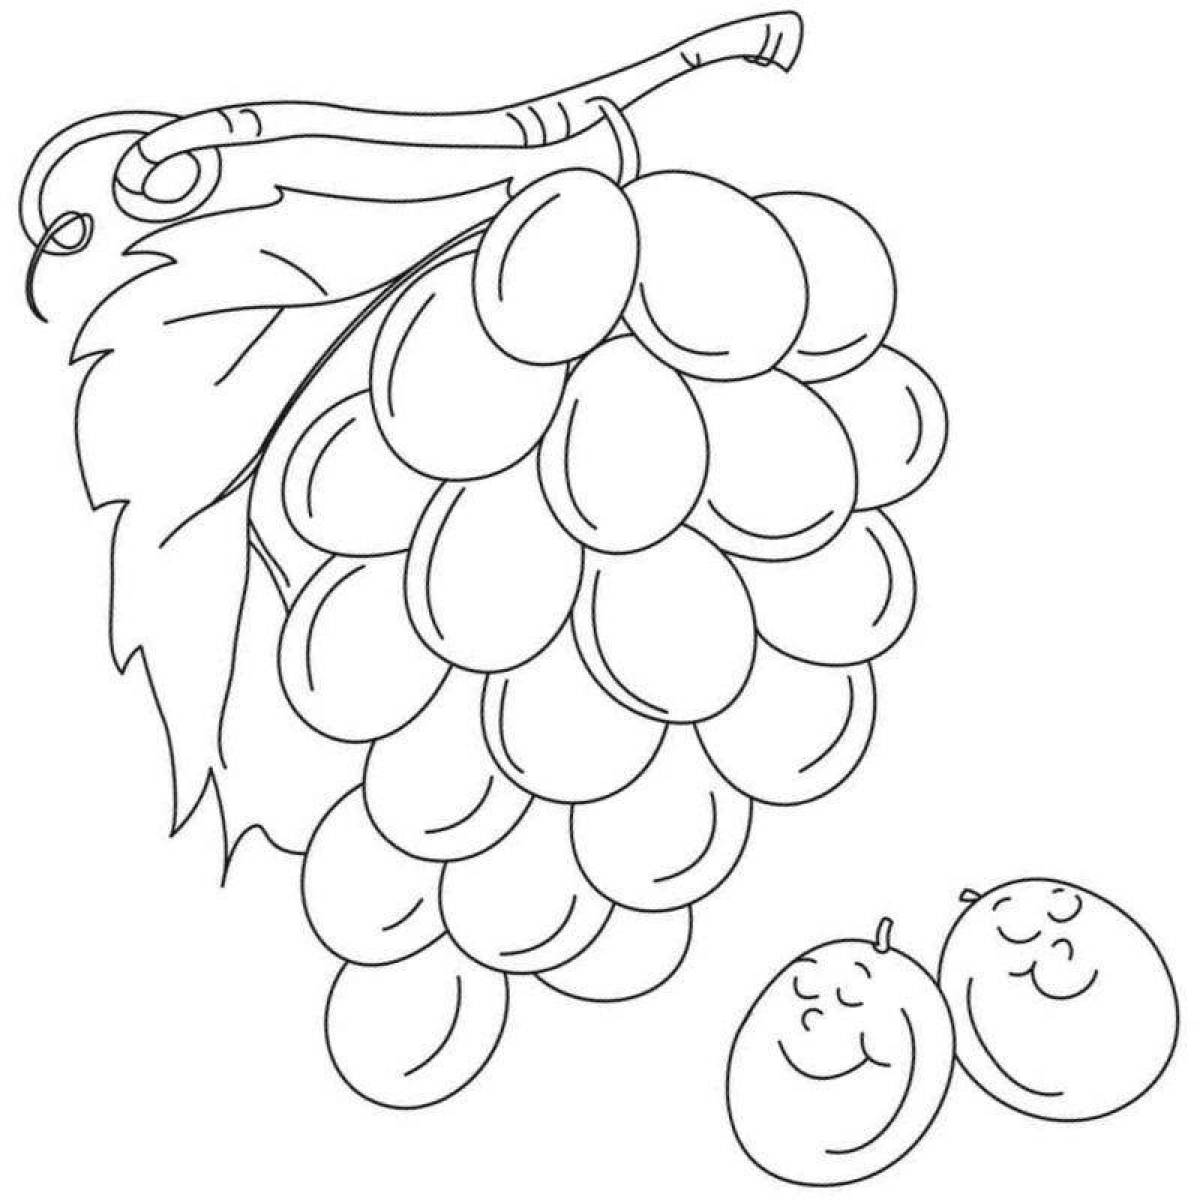 Adorable grape coloring book for kids